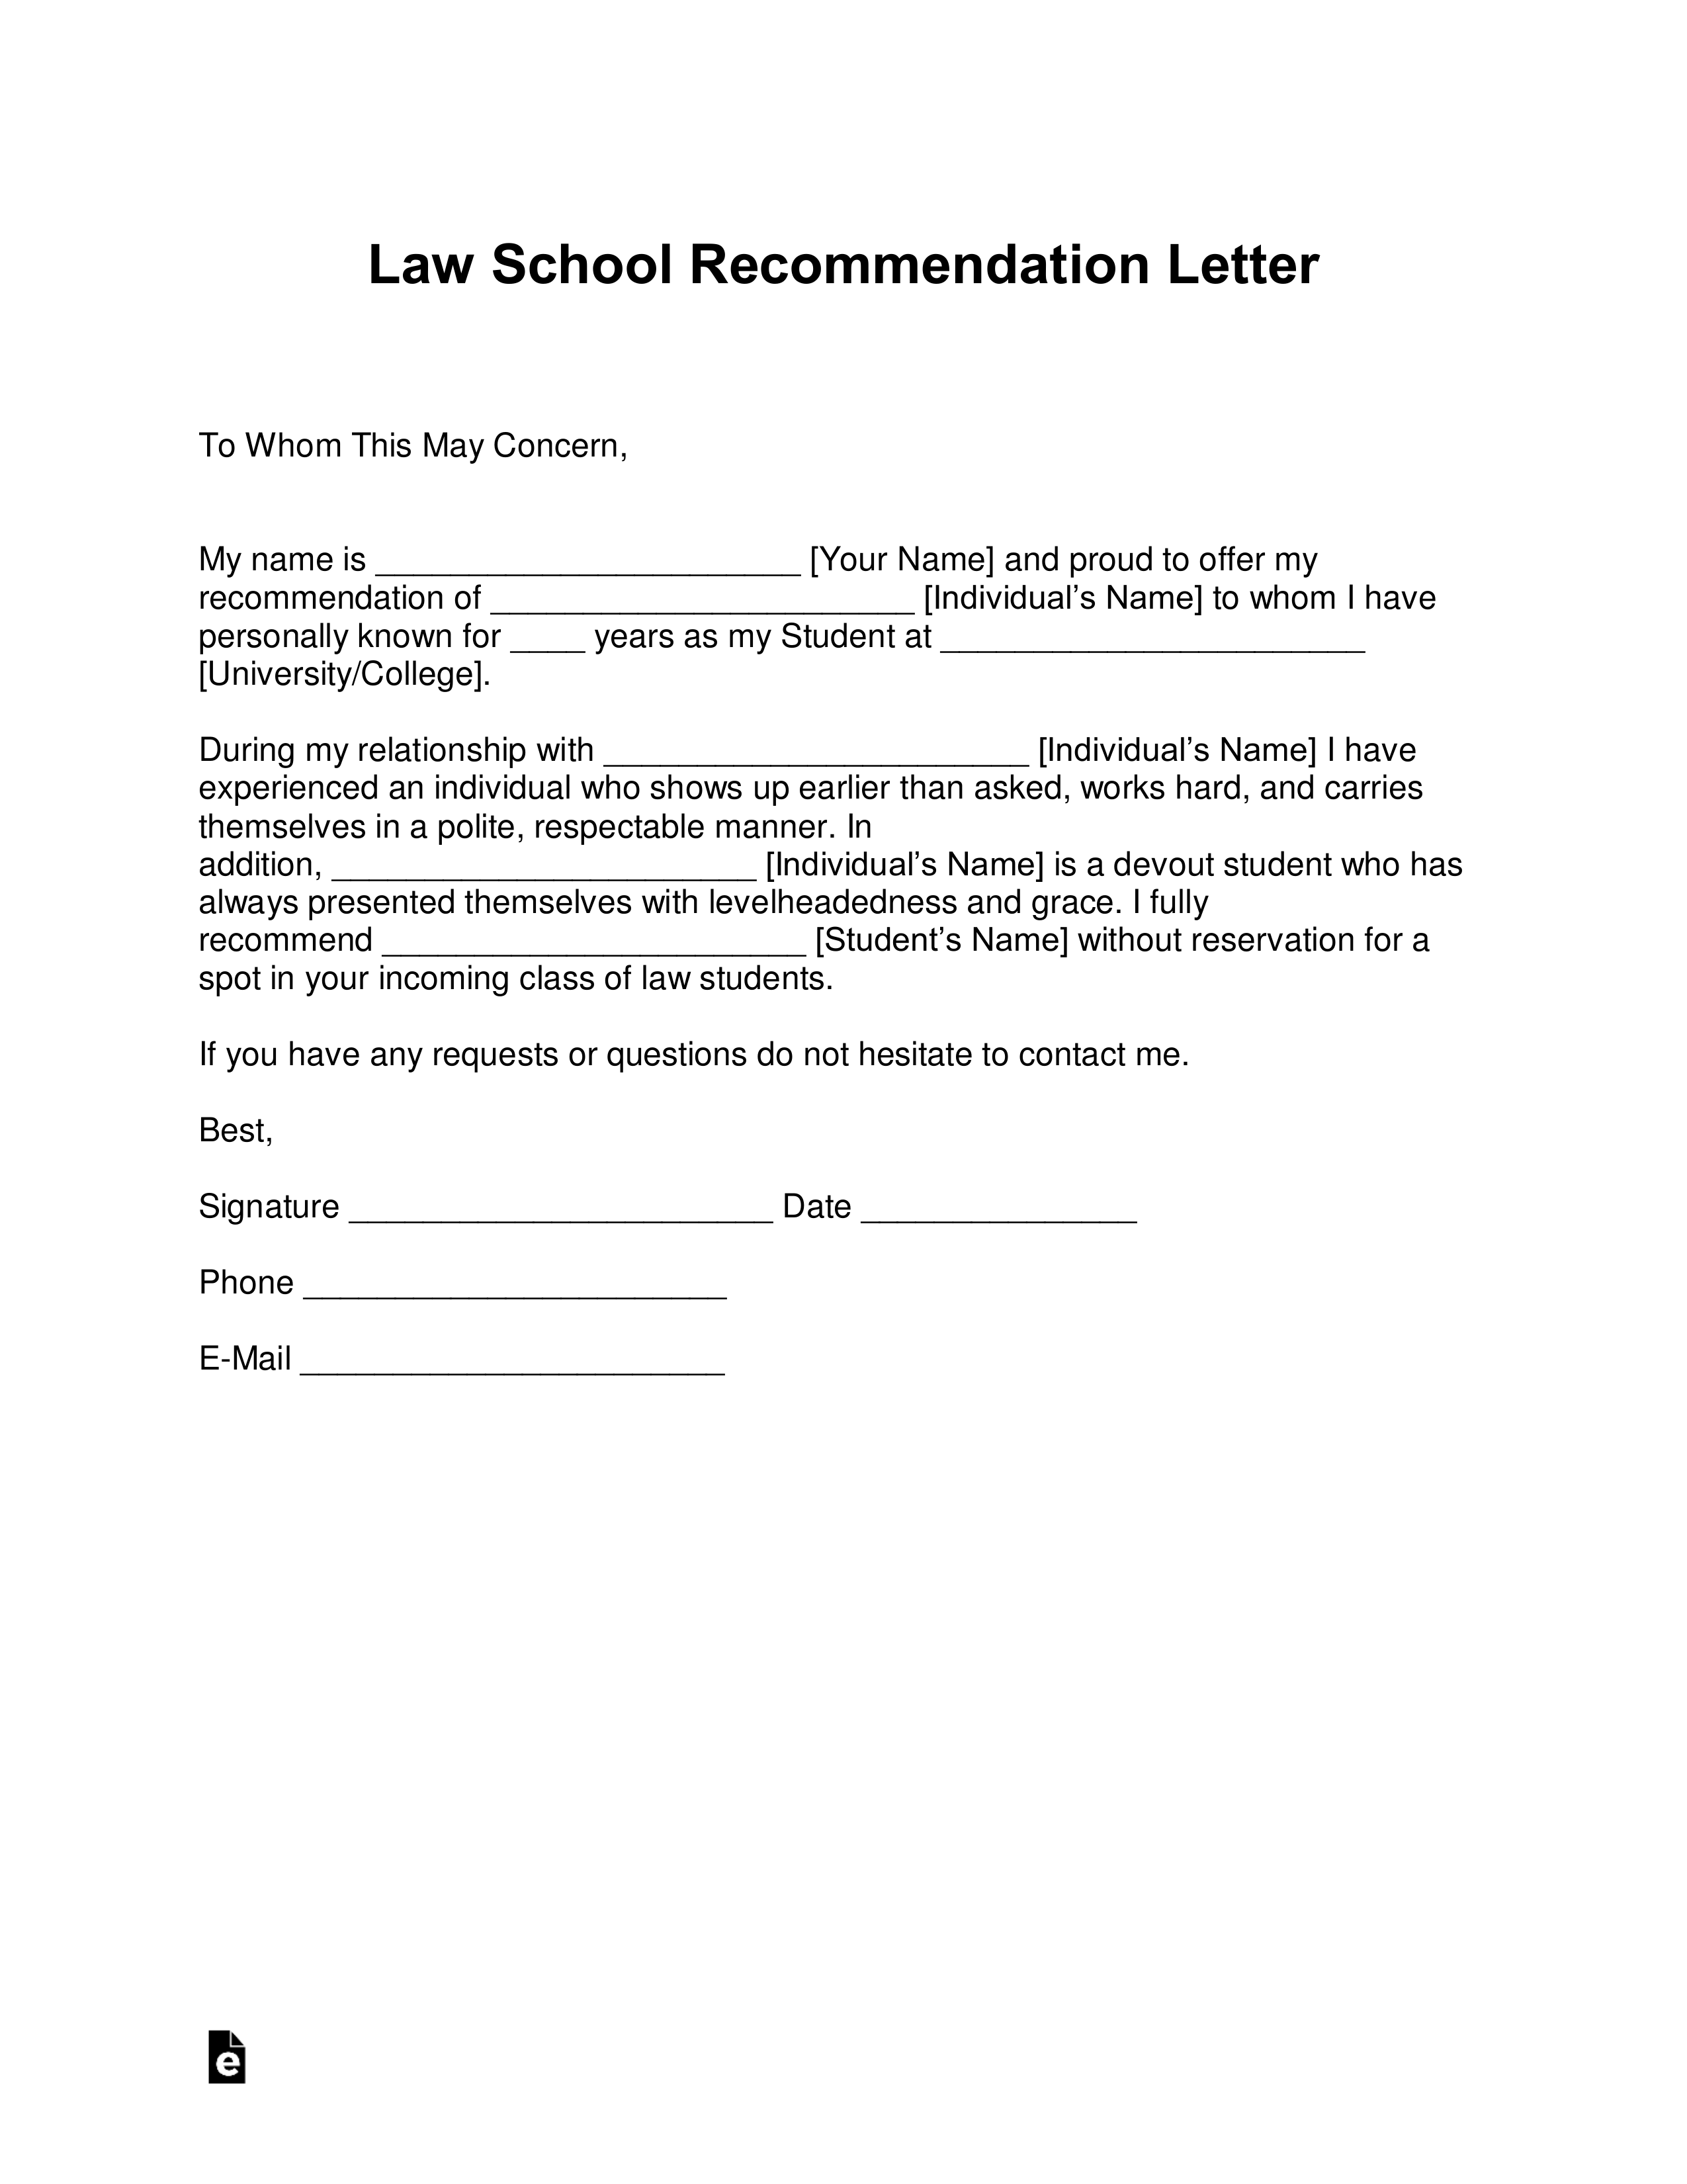 Sample Letter Of Recommendation For Attorney Job from eforms.com